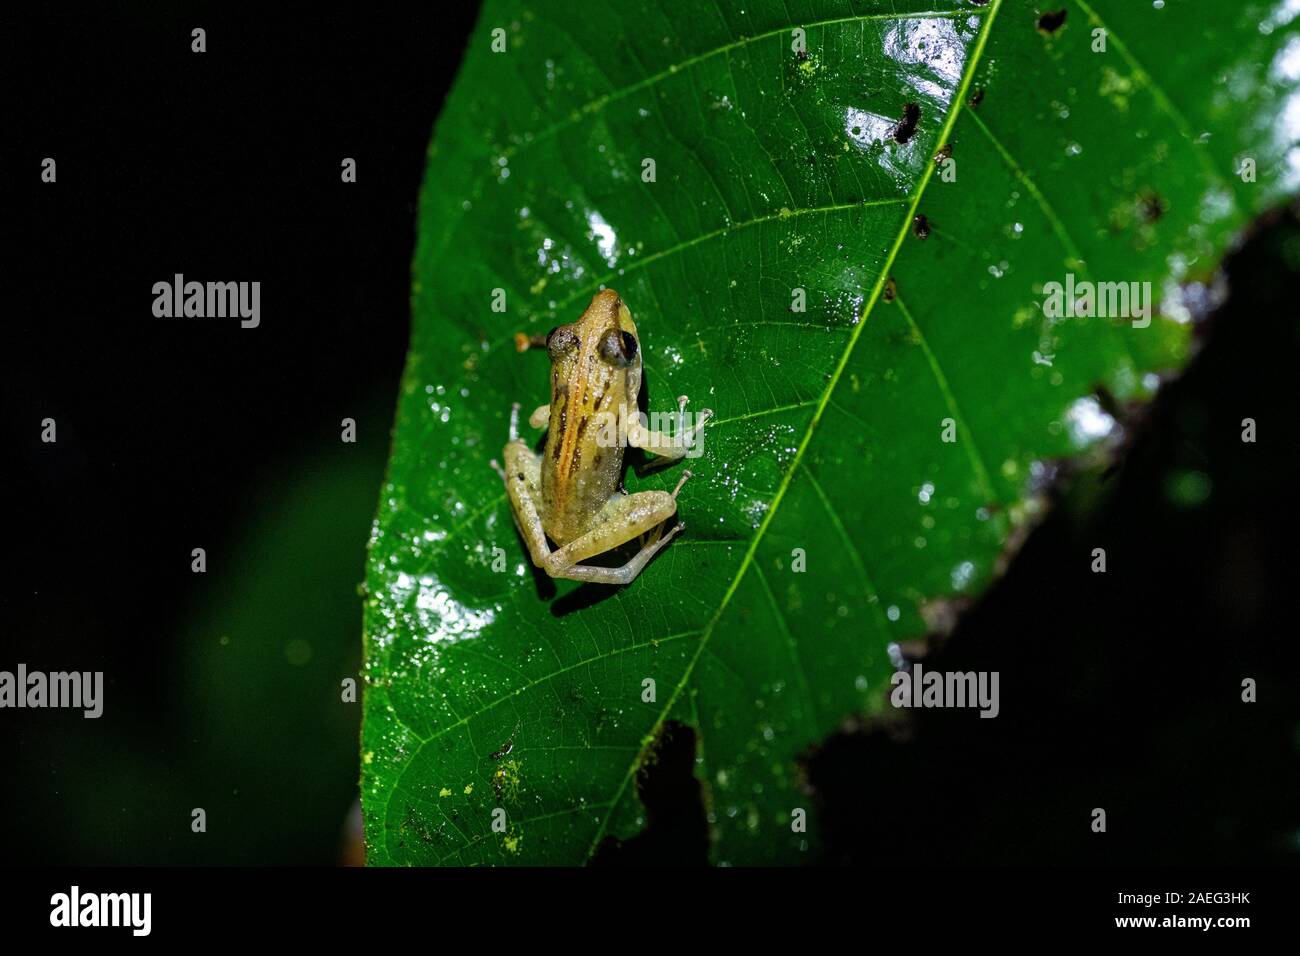 Tiny frog on a leaf in the Costa Rican Rainforest Stock Photo